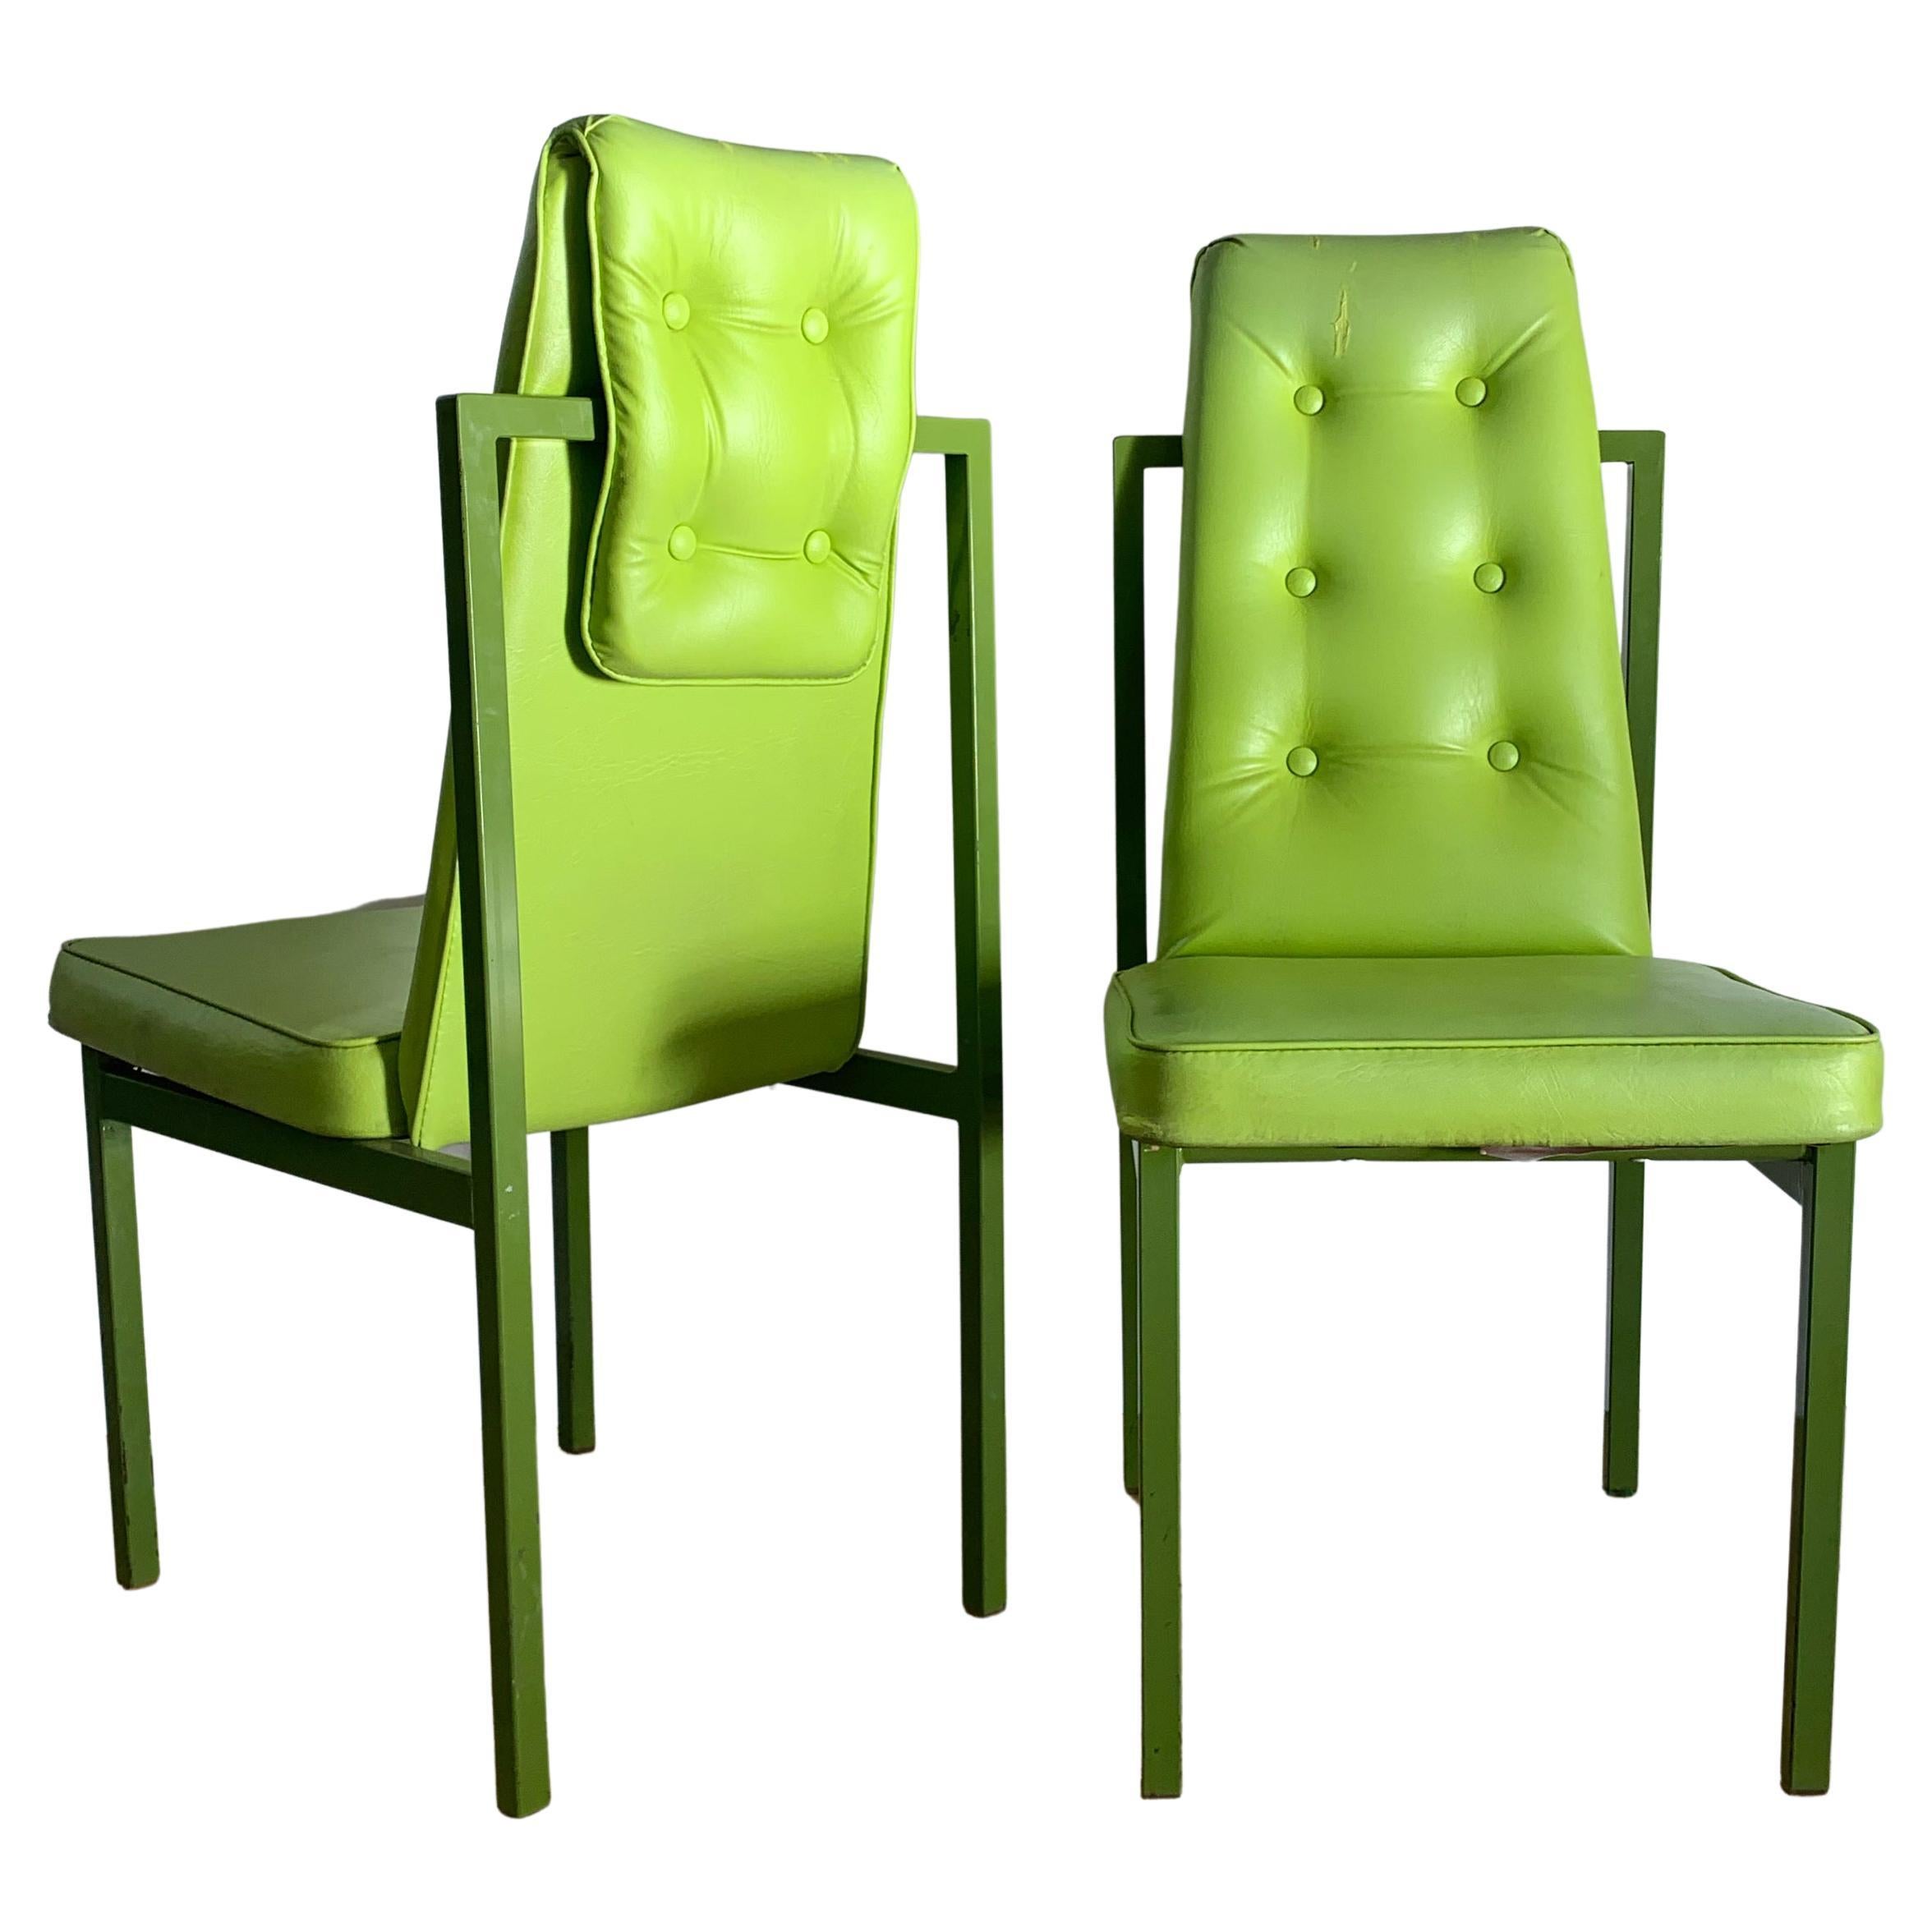 Pair of Geometric Chartreuse Cal-Style Accent Chairs, circa 1970s